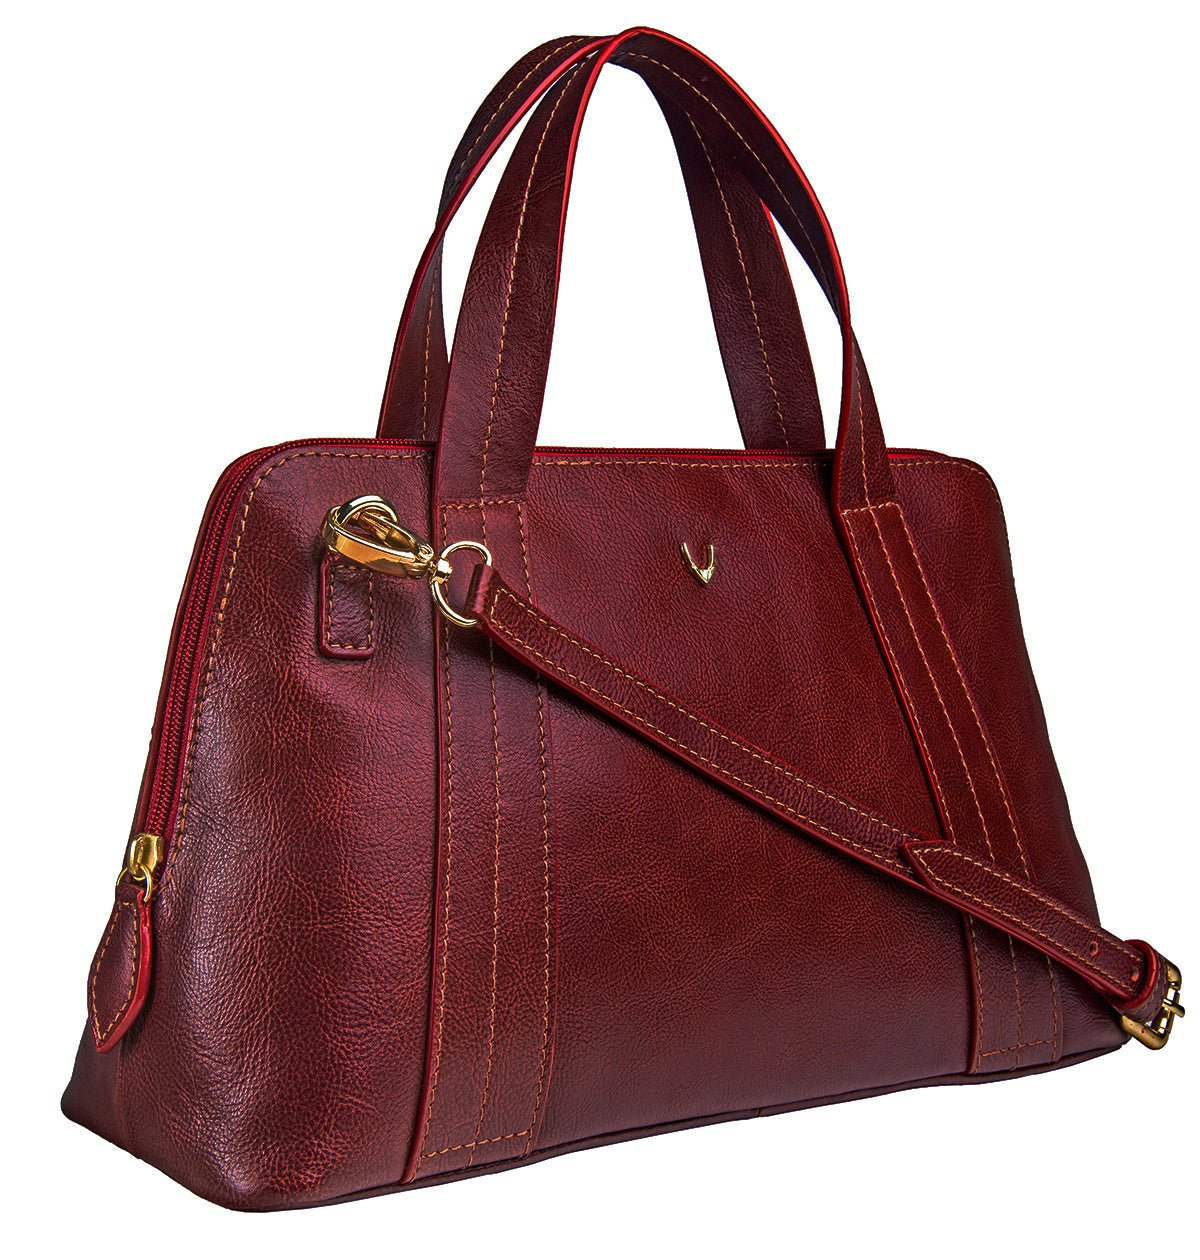 Bags & Luggage - Women's Bags - Top-Handle Bags Hidesign Cerys Leather Satchel